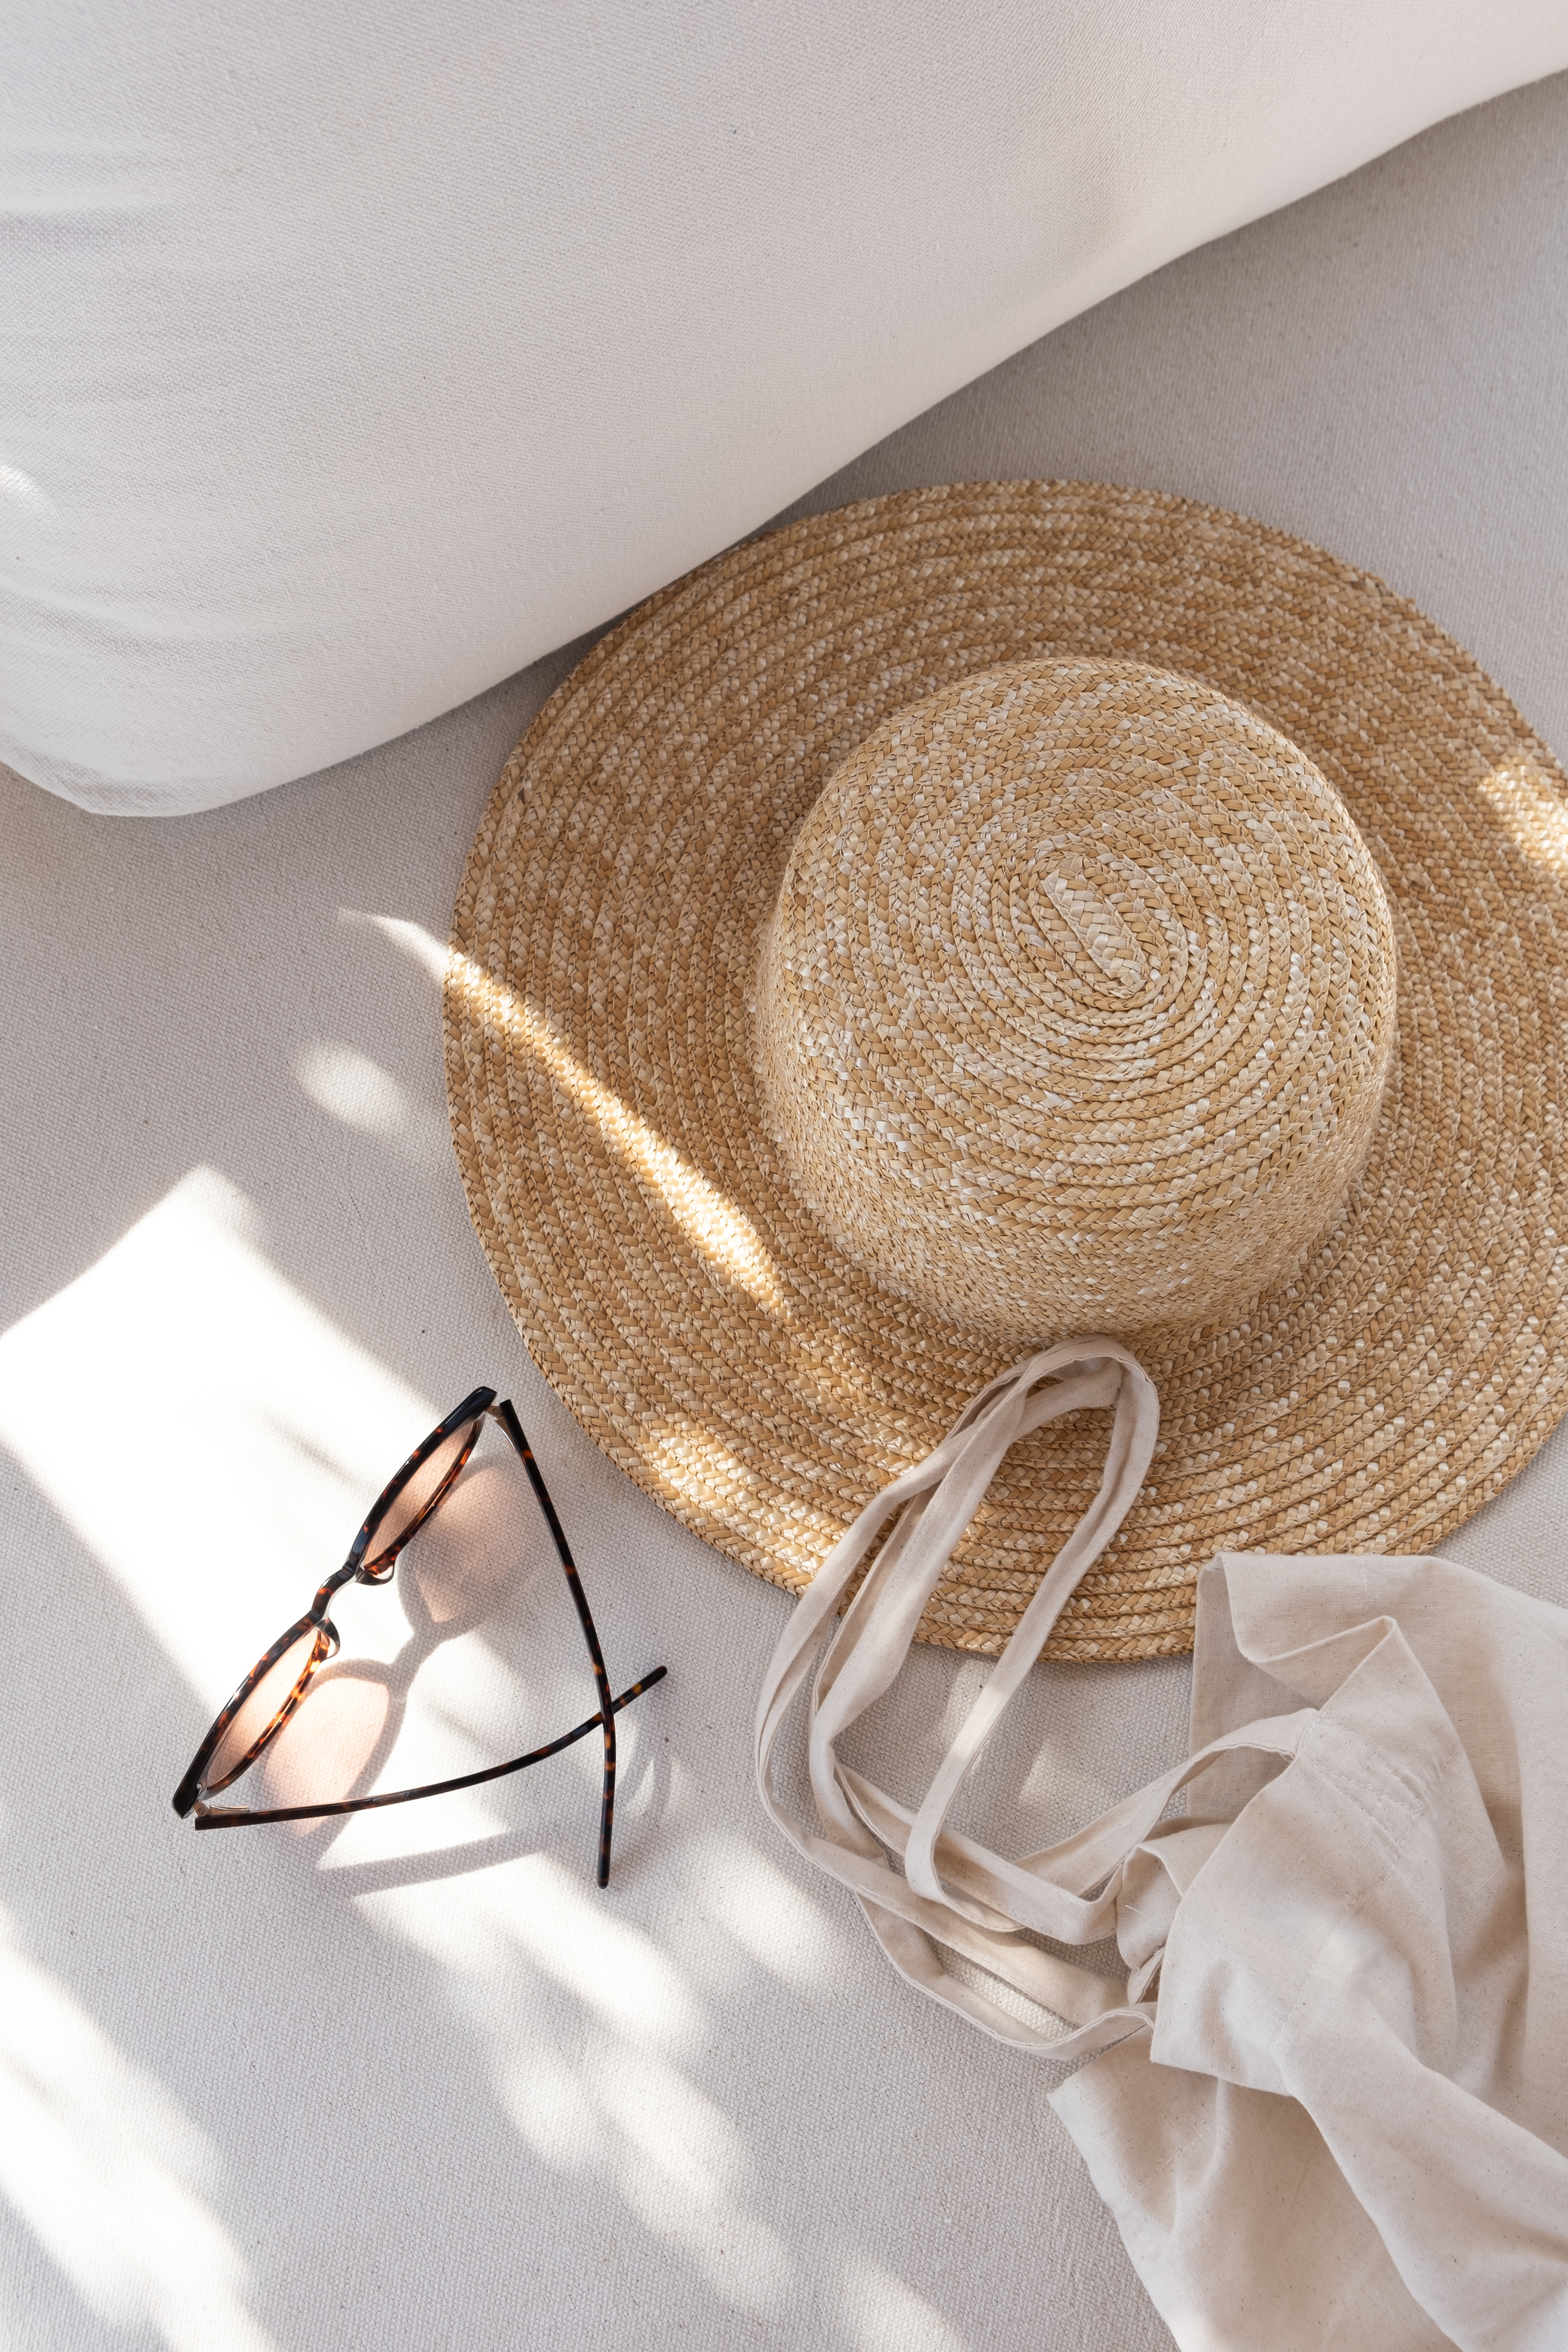 Summer Travel Items with Sunglasses, Hat, and Tote Bag